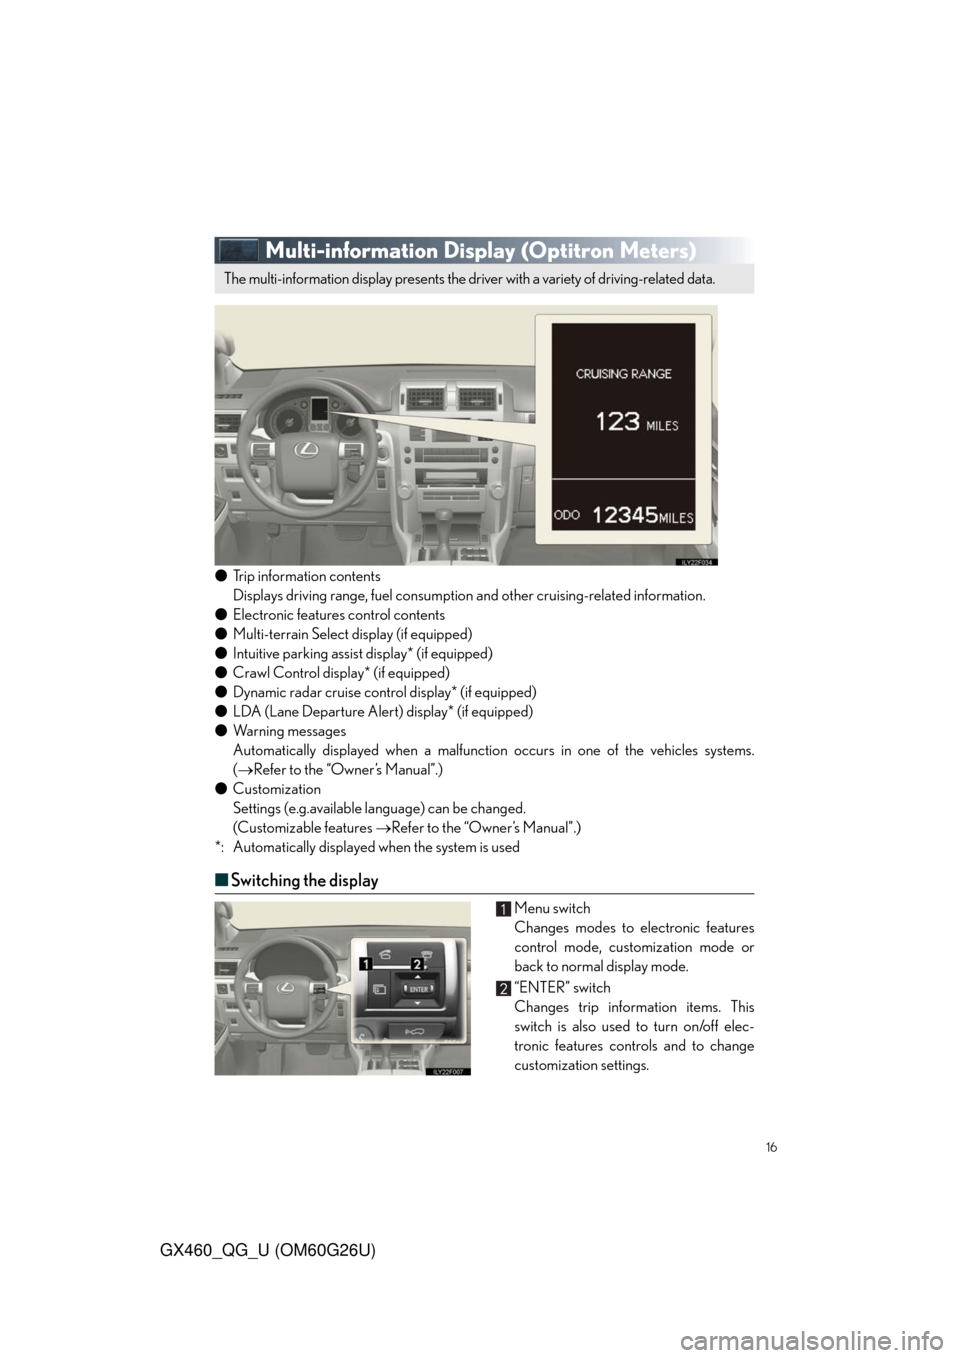 Lexus GX460 2011  Do-It-Yourself Maintenance / LEXUS 2011 GX460 OWNERS MANUAL QUICK GUIDE (OM60G26U) 16
GX460_QG_U (OM60G26U)
Multi-information Display (Optitron Meters)
●Trip information contents
Displays driving range, fuel consumption and other cruising-related information.
●Electronic feature